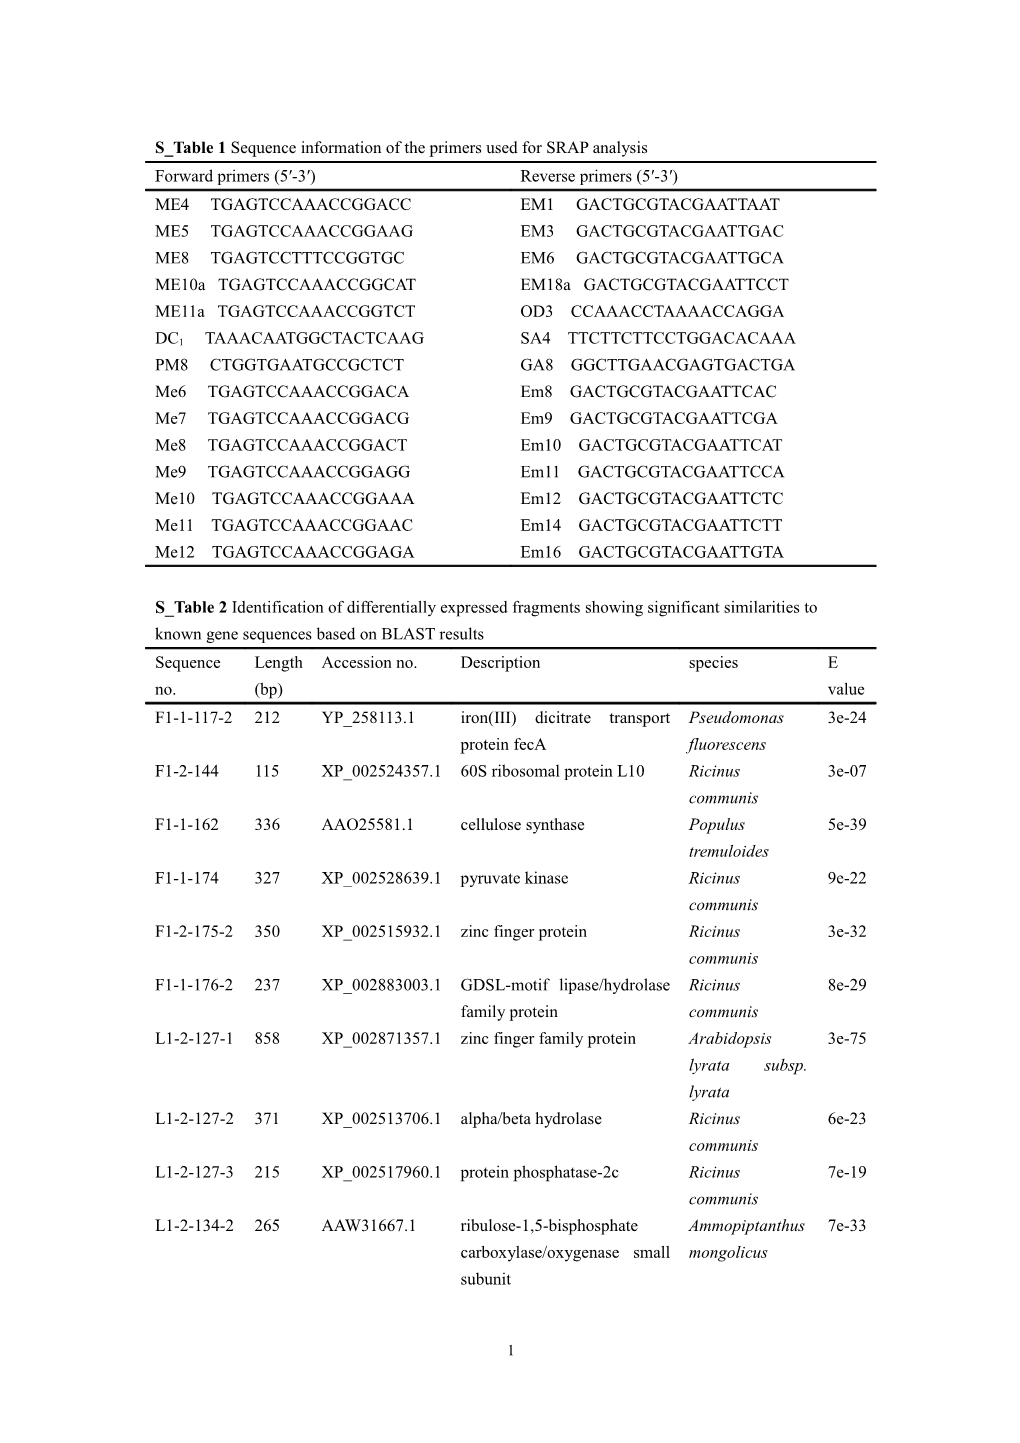 S Table1sequence Information of the Primers Used for SRAP Analysis